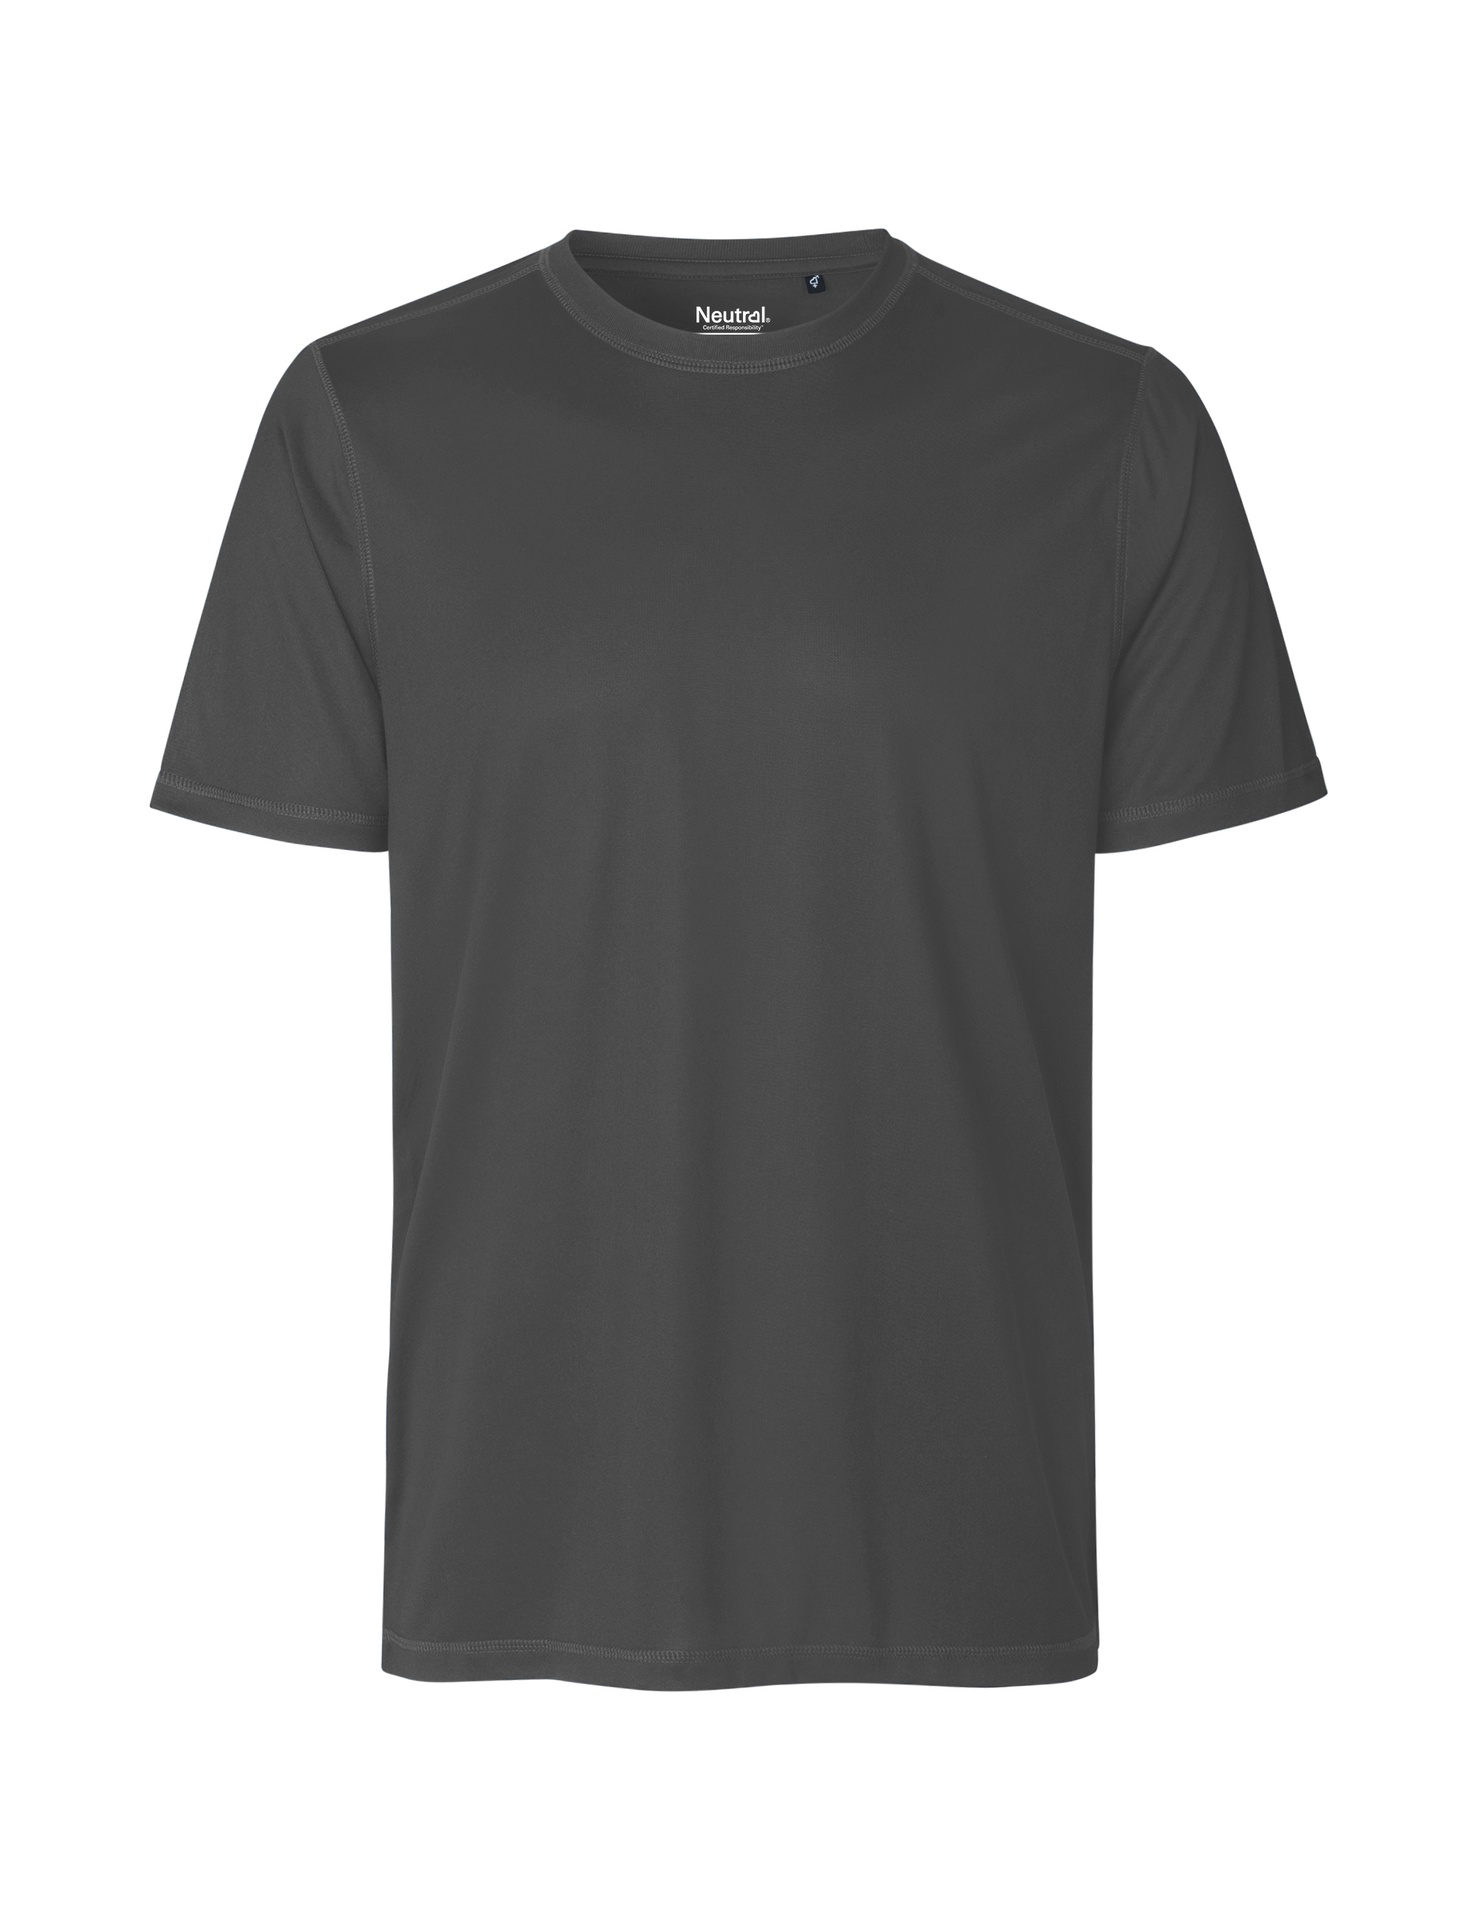 [PR/03772] Recycled Performance T-Shirt (Charcoal 06, S)